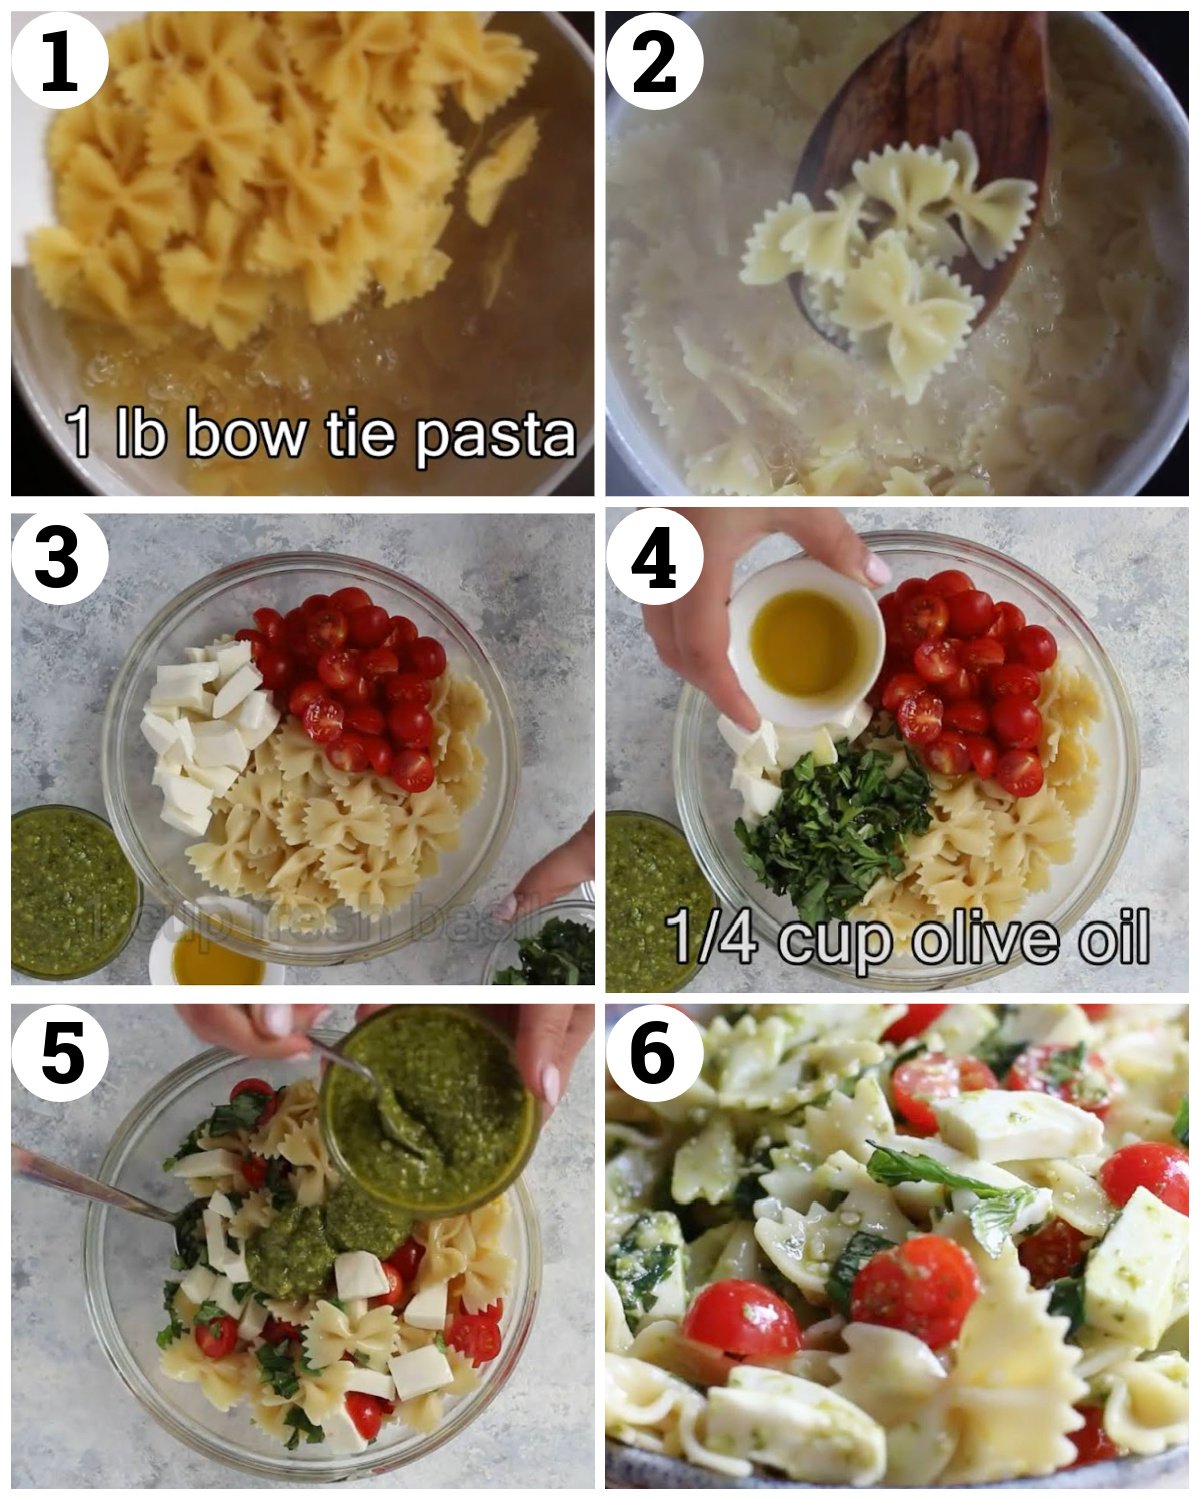 Cook the pasta and let it cool, add in mozzarella, tomatoes, basil, olive oil and pesto. Mix and chill in the fridge. 